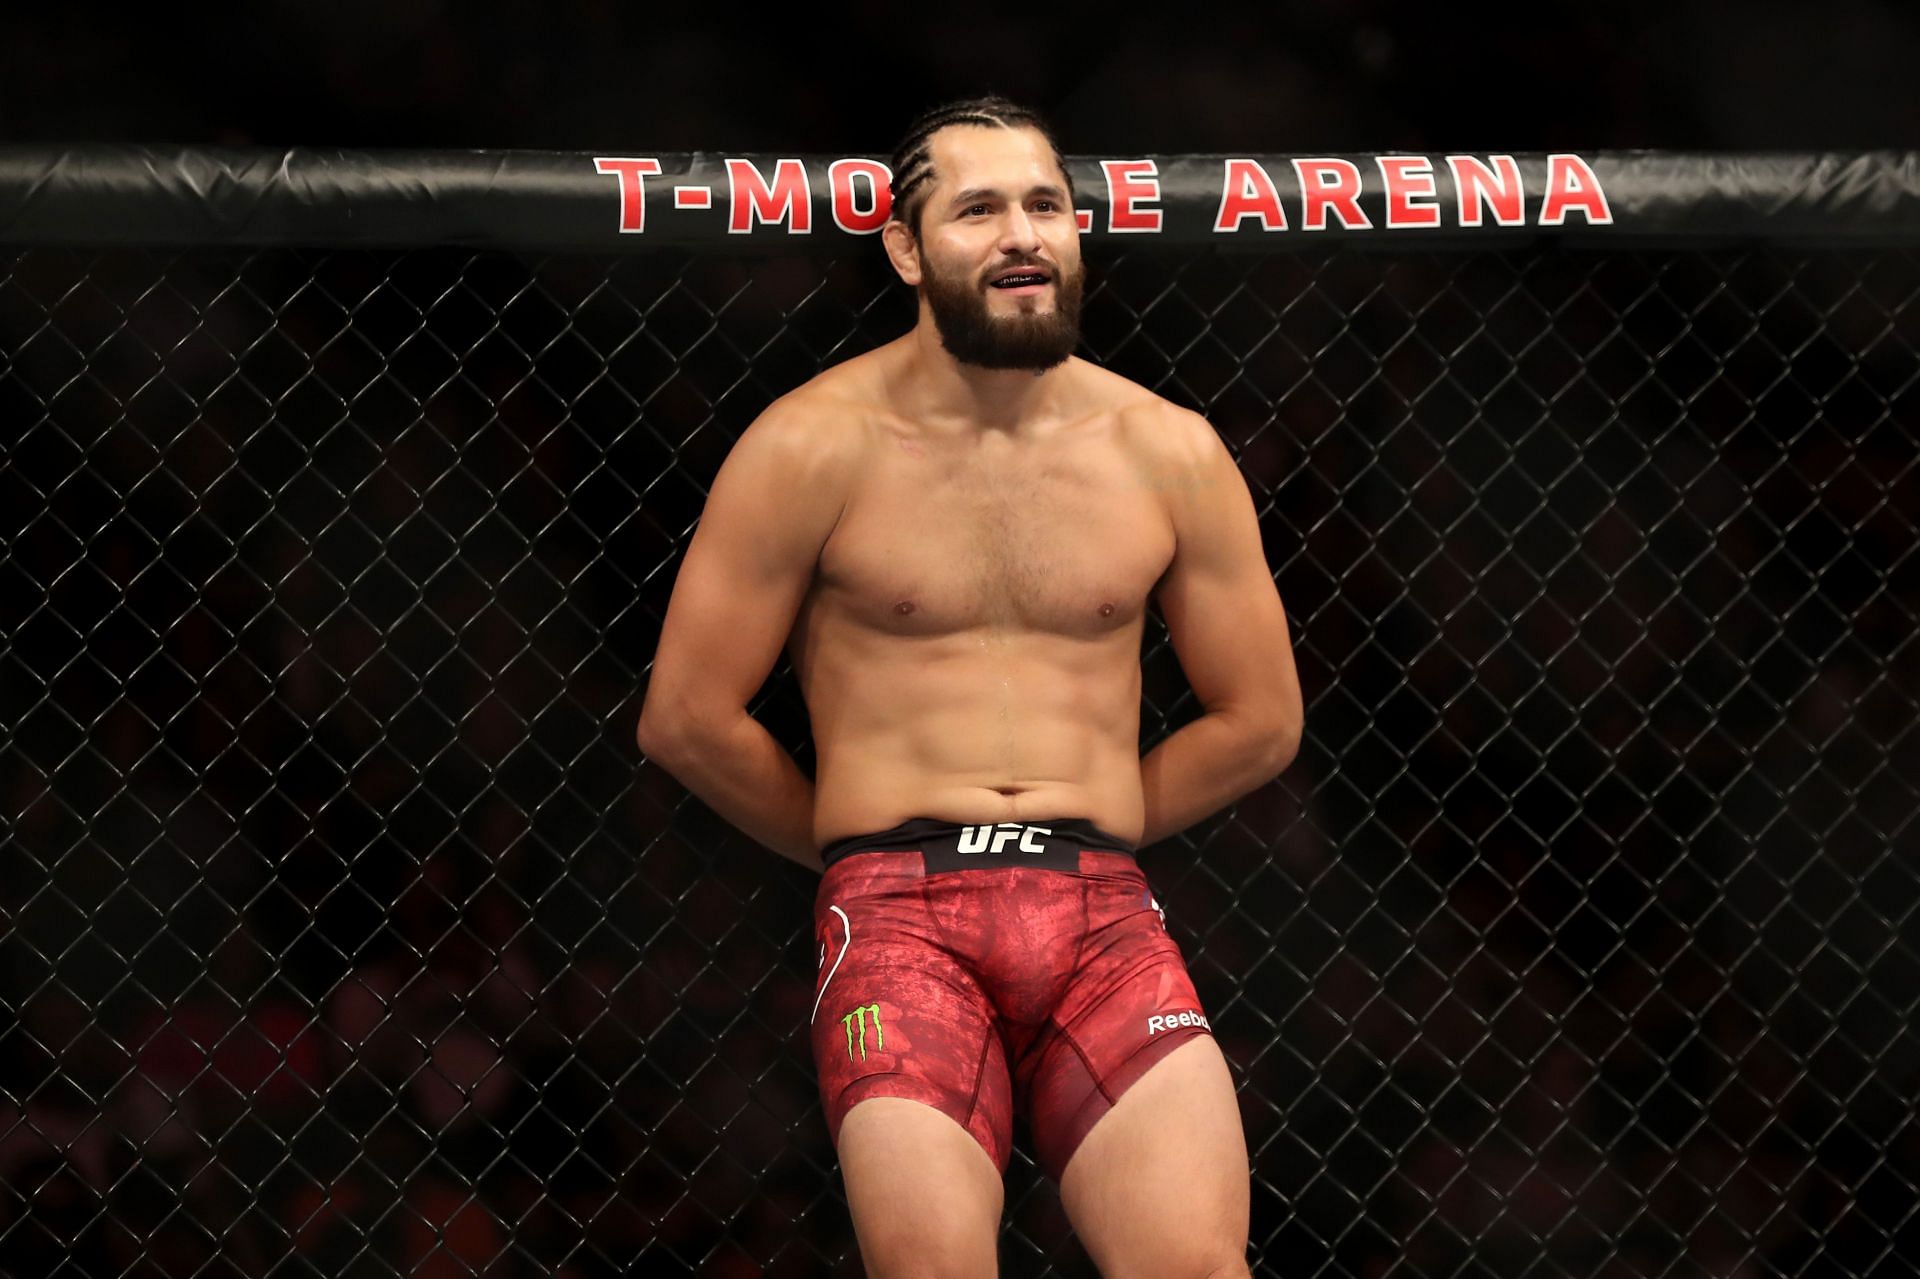 Is Jorge Masvidal the next opponent for Vecente Luque?